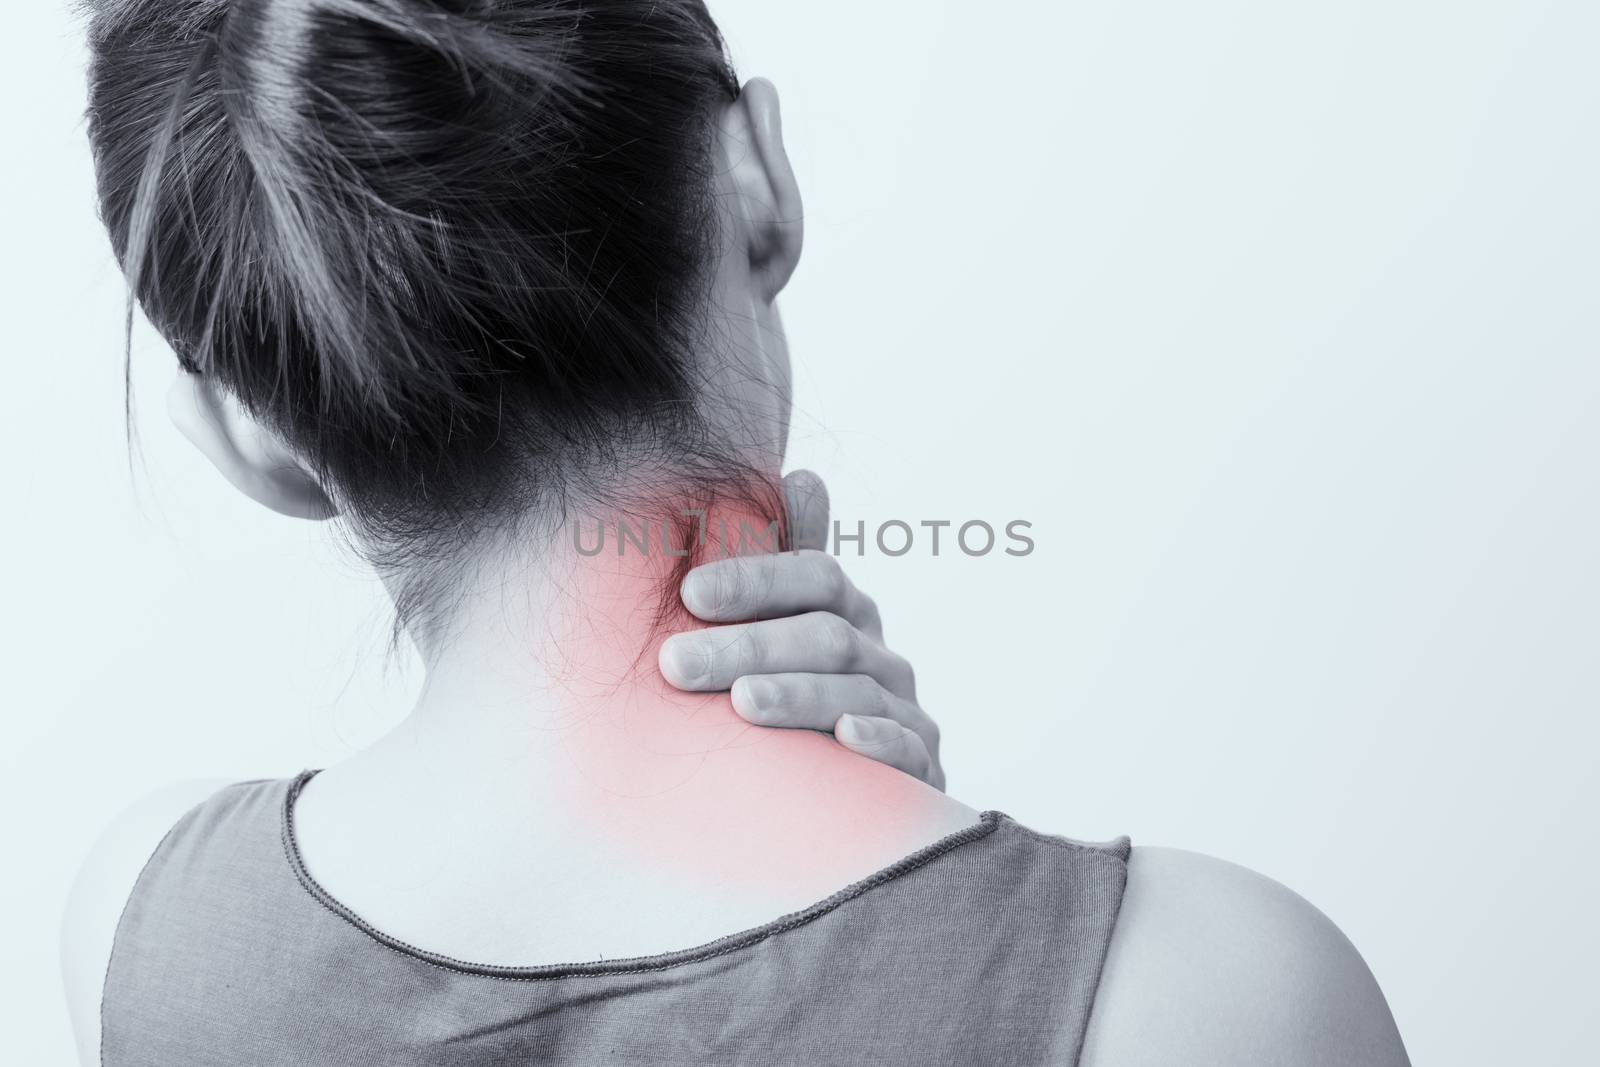 closeup women neck and shoulder pain/injury with red highlights on pain area with white backgrounds, healthcare and medical concept - B&W filter